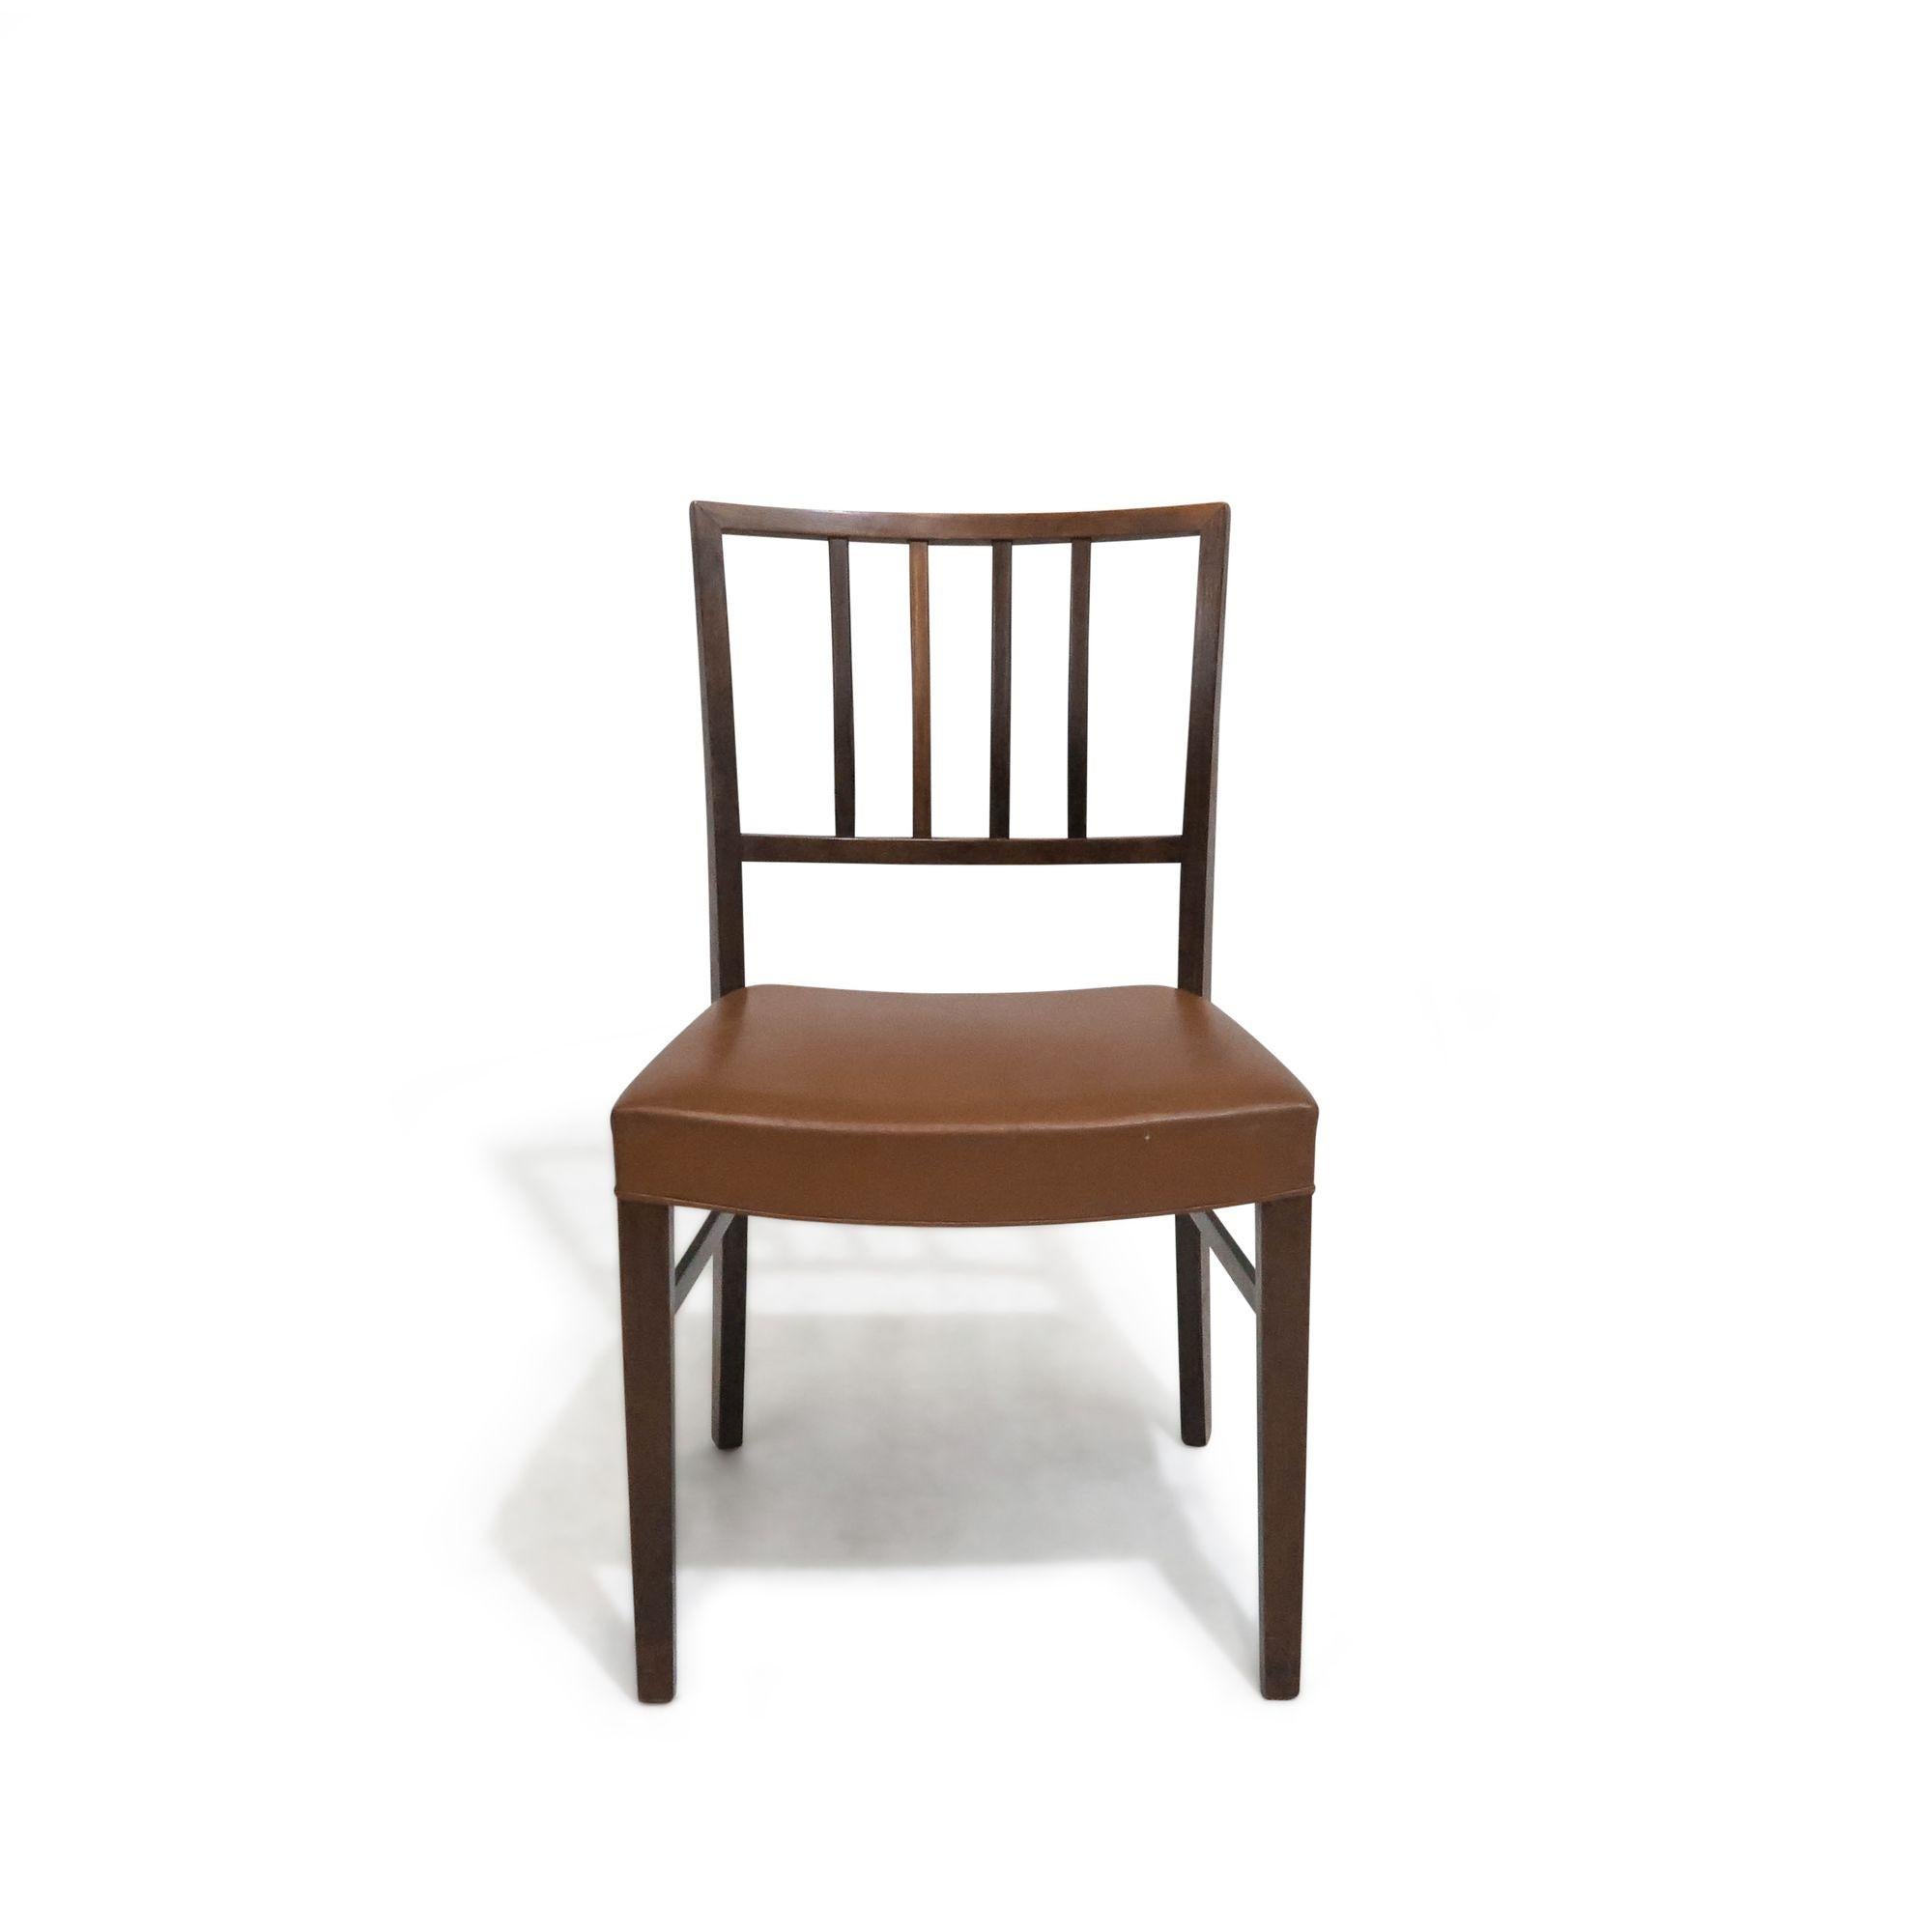 Set of 6 dining chairs in manner of Jacob Kjaer, crafted of rosewood with minimal slatted backs, upholstered in the original saddle leather.
The chairs are in good original condition.
 
Measurements:
18.75'' x D 20.25'' X H 32.50''
Seat Height